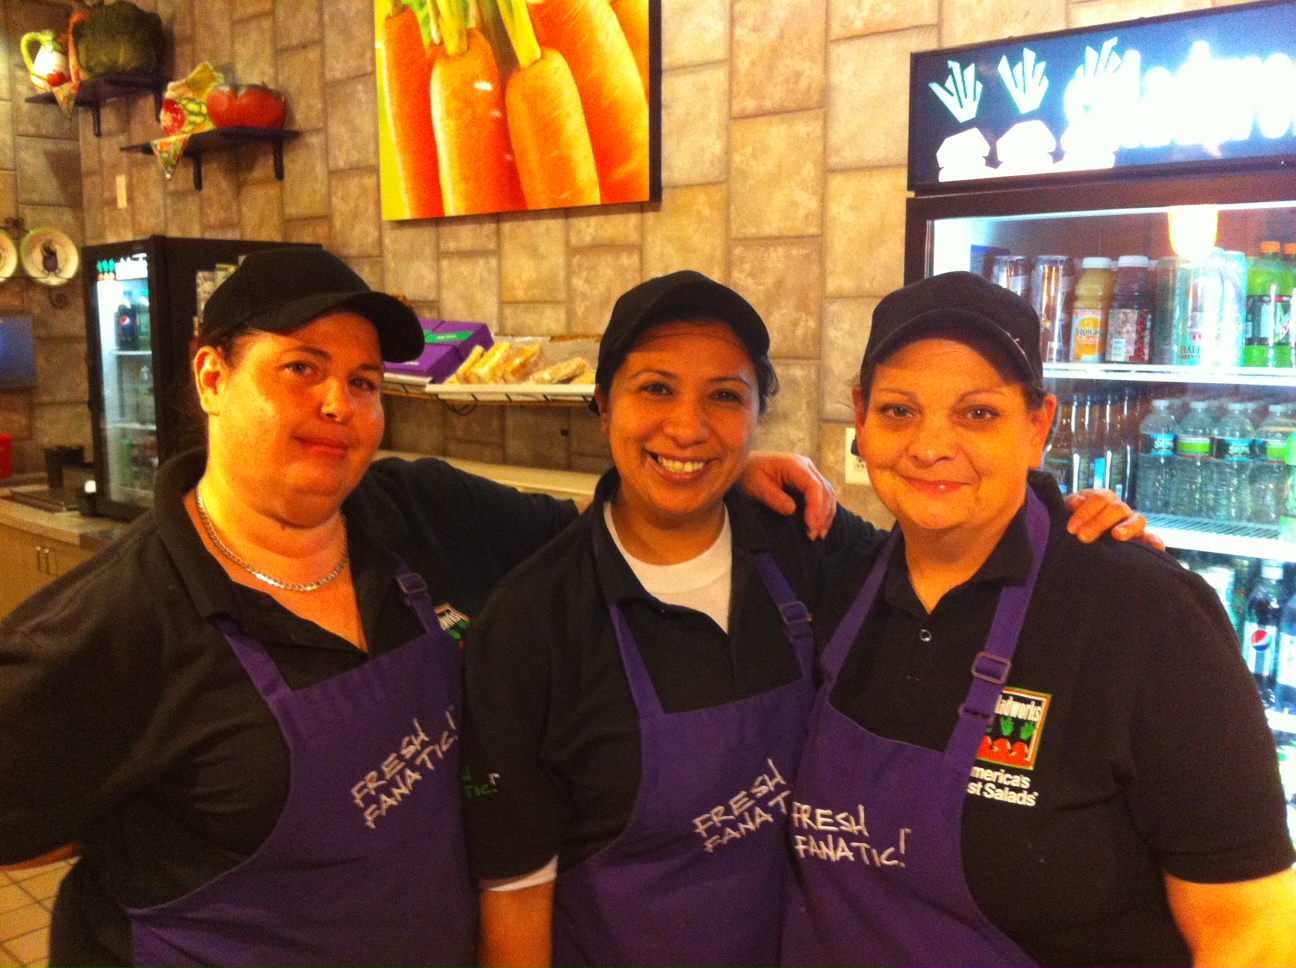 My lovely Salad Works team: Mirian, Cathy, and Erin